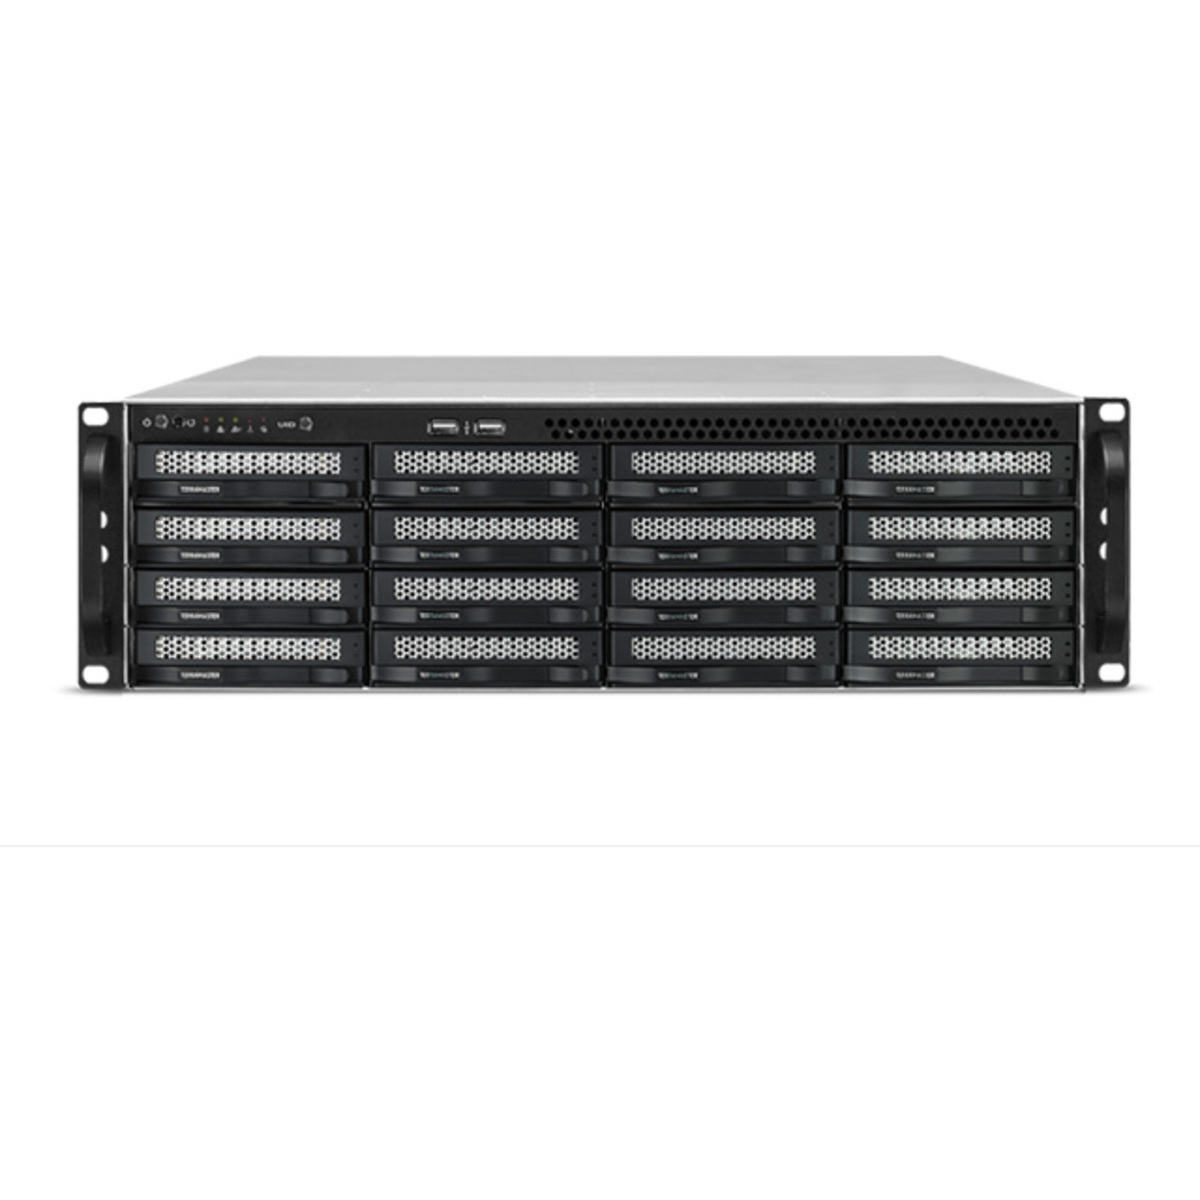 TerraMaster U16-722-2224 78tb 16-Bay RackMount Large Business / Enterprise NAS - Network Attached Storage Device 13x6tb Seagate IronWolf ST6000VN006 3.5 5400rpm SATA 6Gb/s HDD NAS Class Drives Installed - Burn-In Tested U16-722-2224